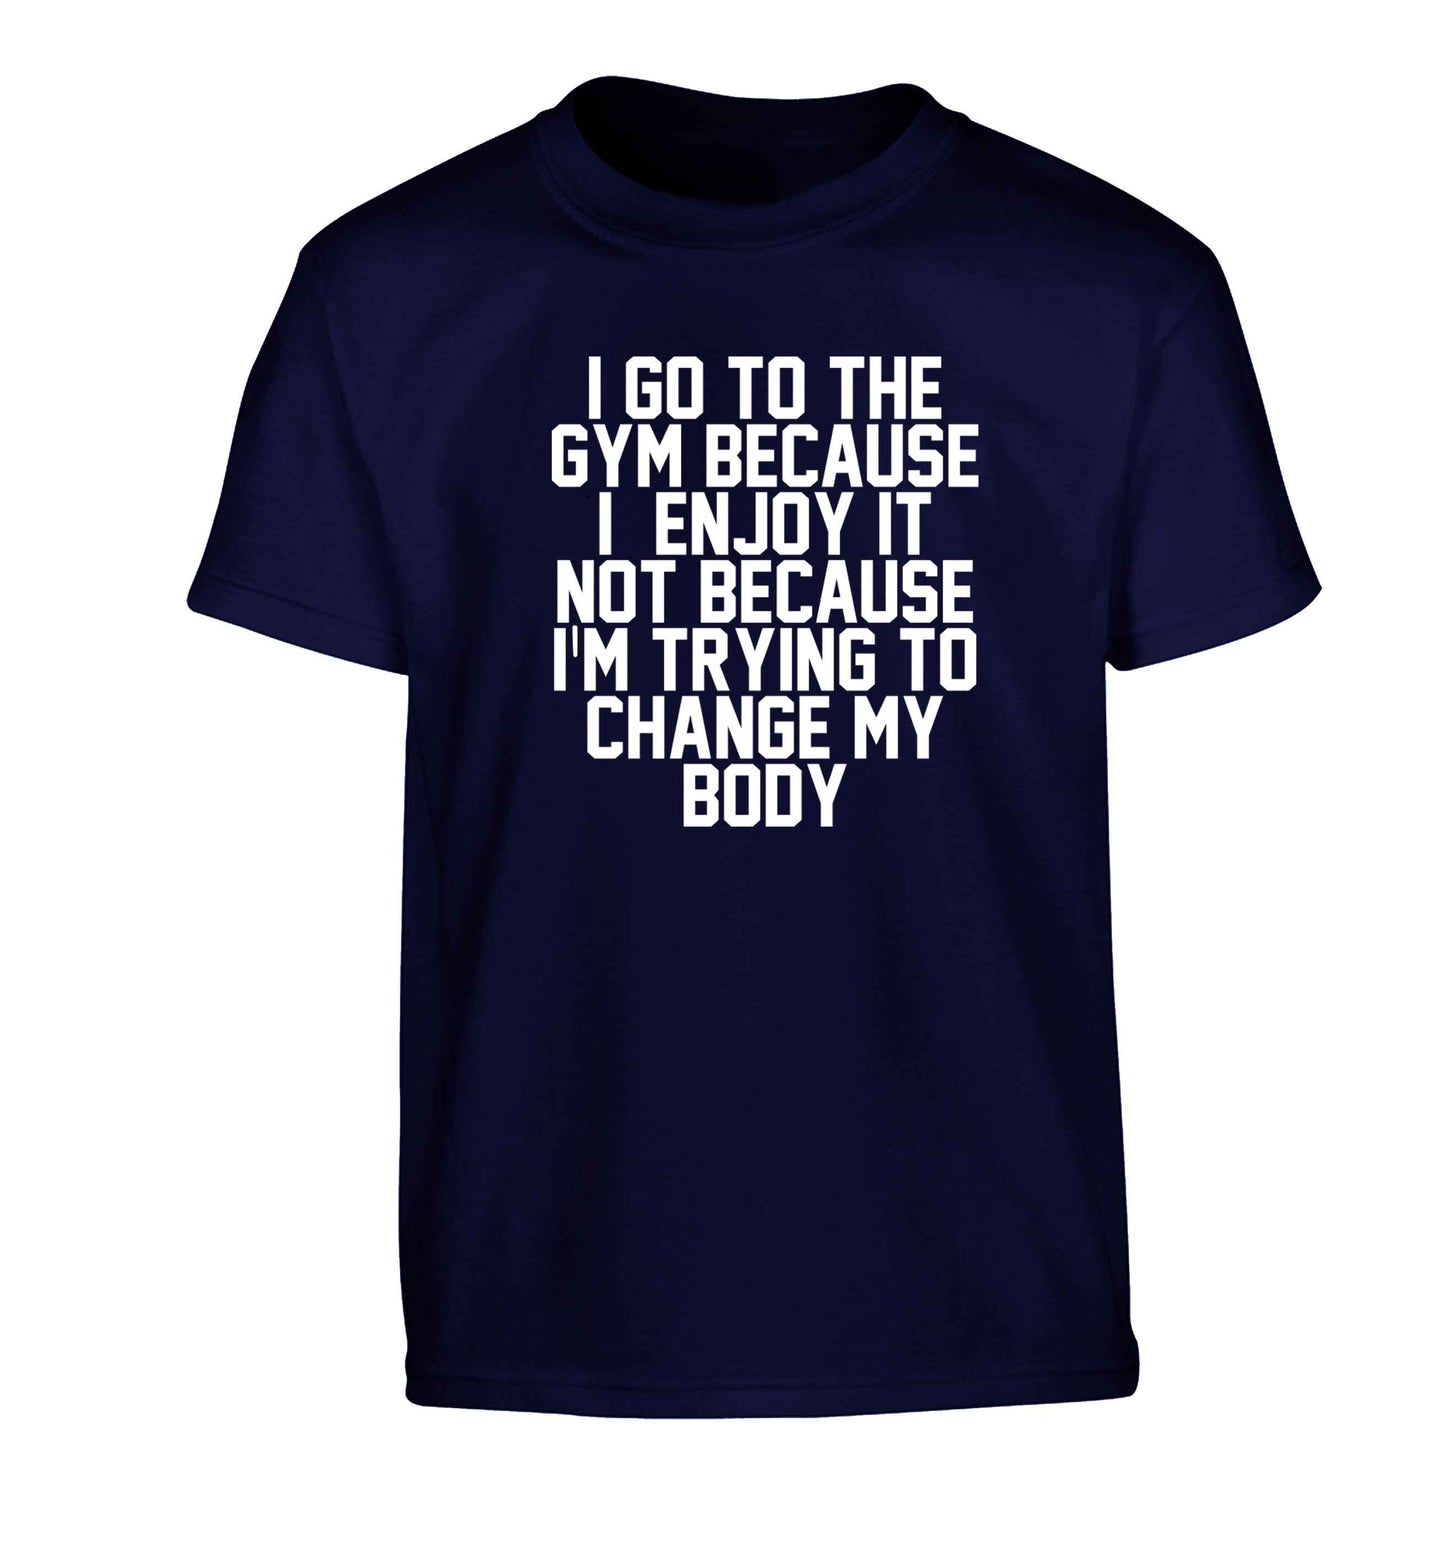 I go to the gym because I enjoy it not because I'm trying to change my body Children's navy Tshirt 12-13 Years